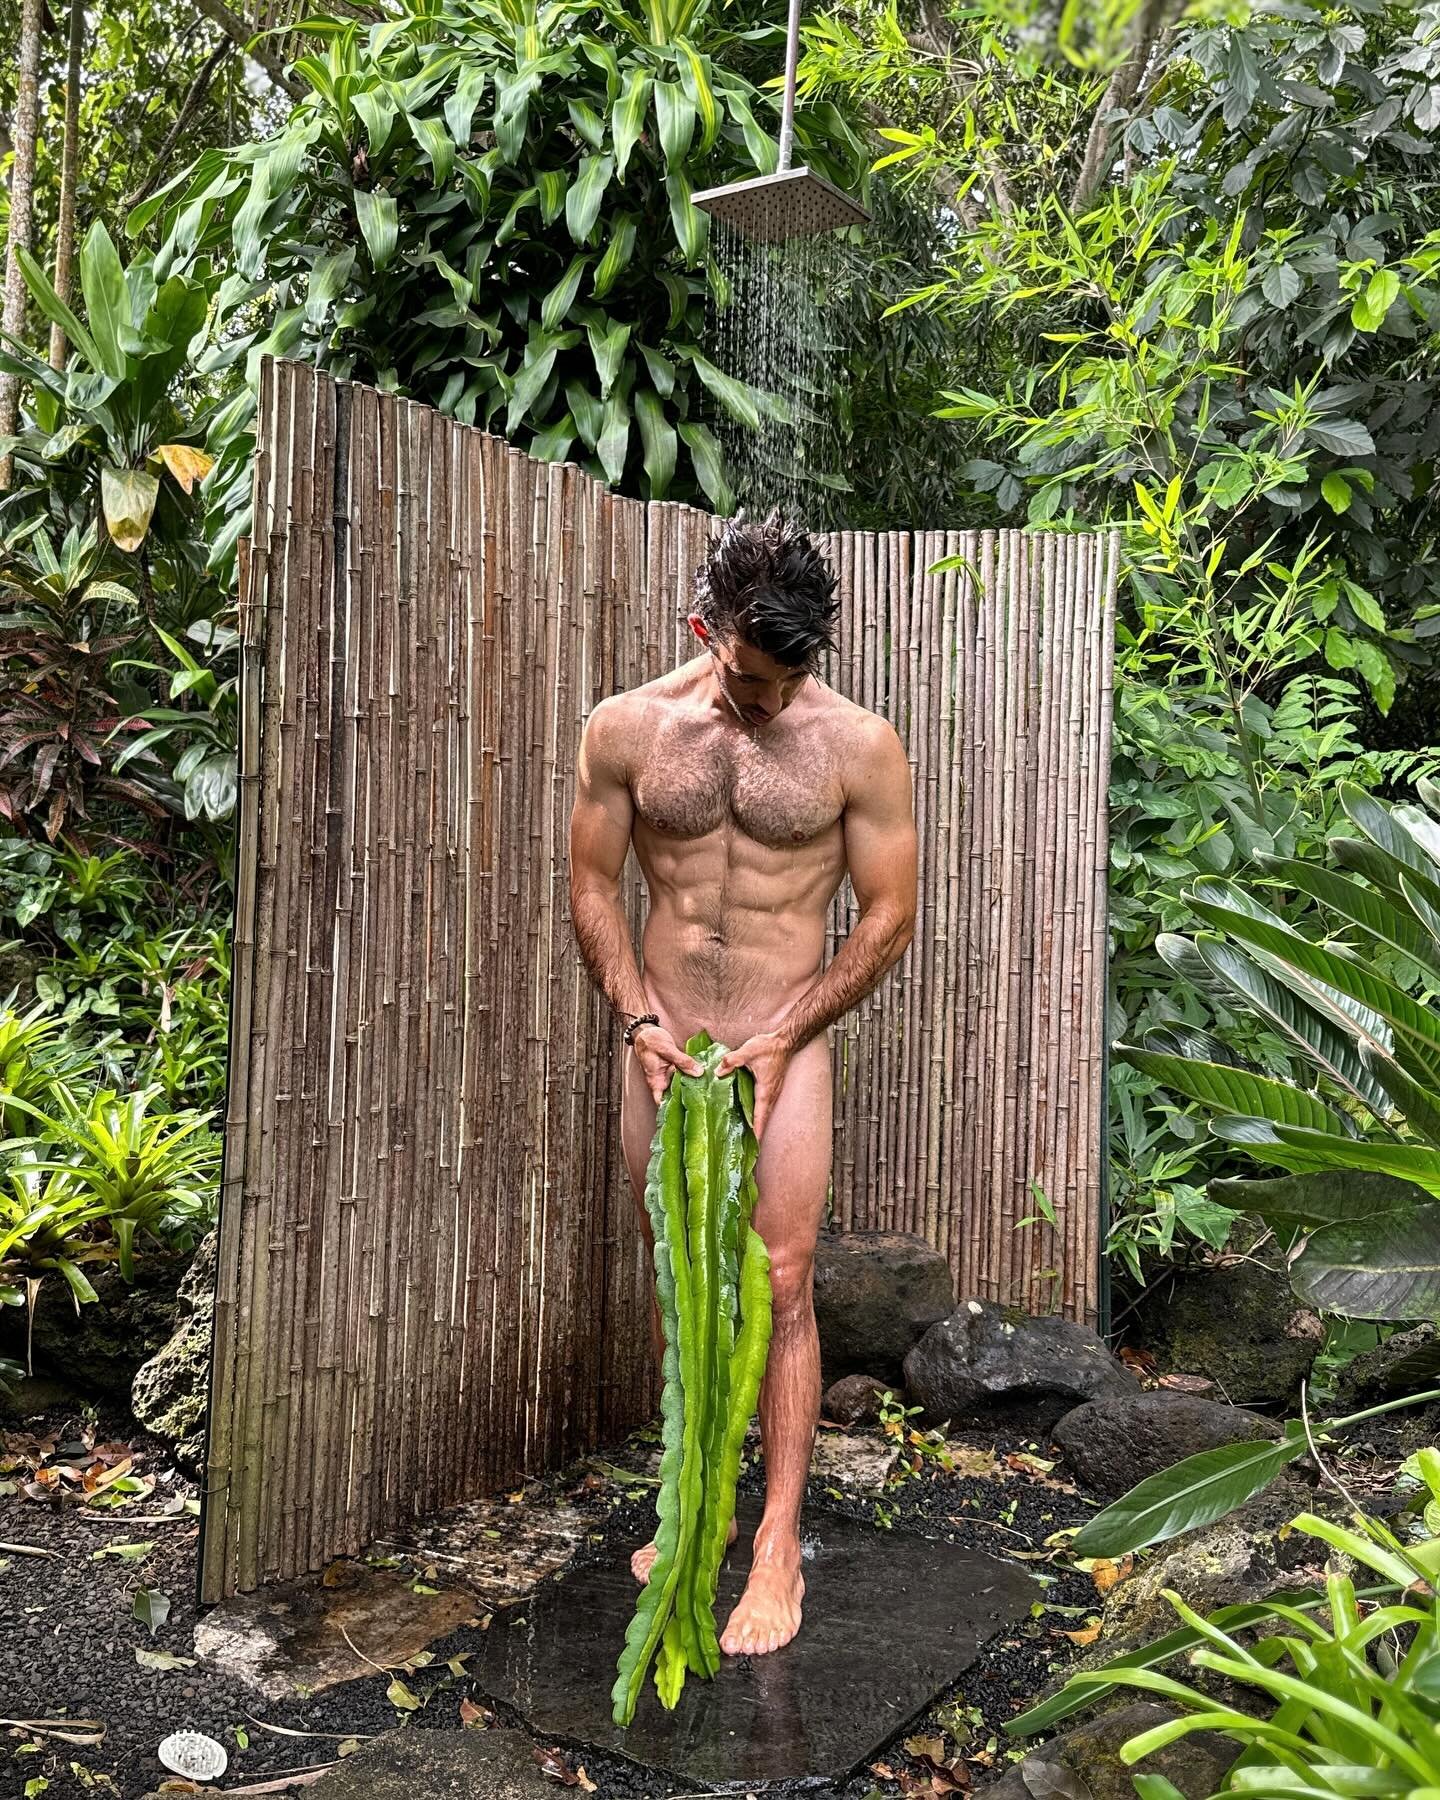 Don&rsquo;t be a prick, I prefer Soy Man 😉⁣⁣
⁣⁣
This was a precarious position to put myself in after harvesting these Dragon Fruit cuttings in Kauai, but it was worth it for #WorldNakedGardeningDay. Shoutout to all the Bro Science trolls who say yo